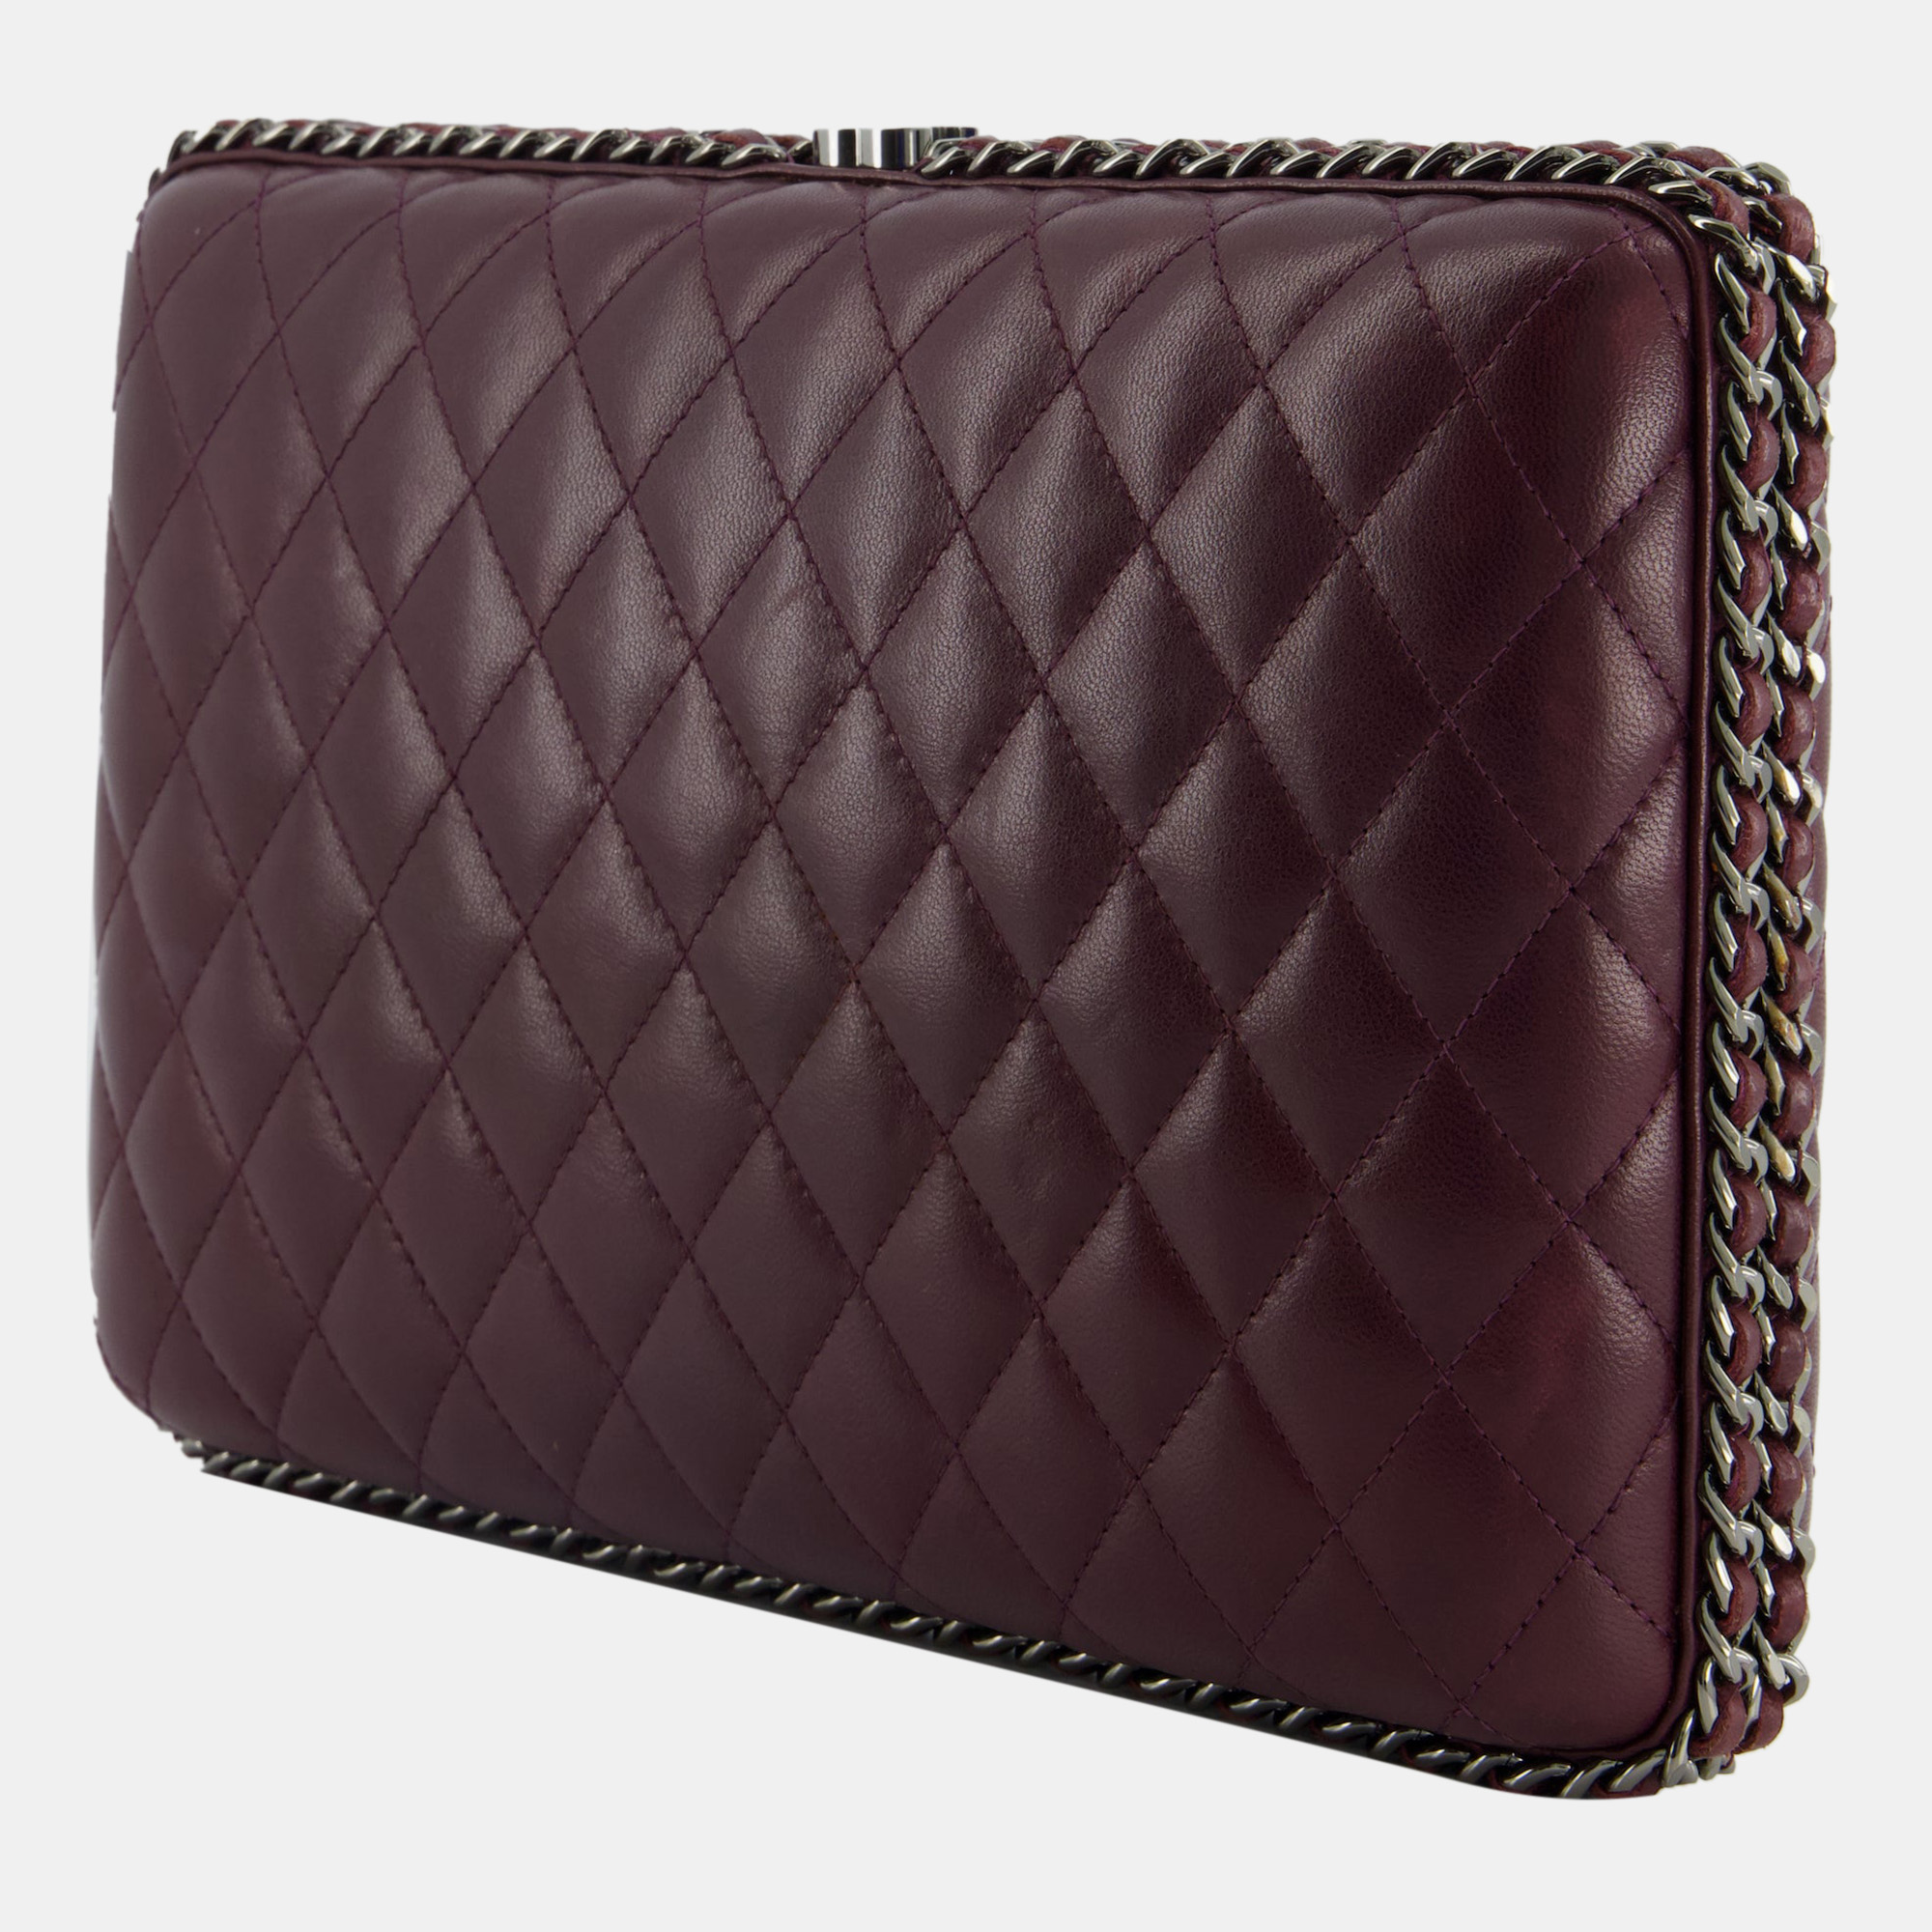 Chanel Burgundy Clutch On Chain Bag With Chain Details And Gunmetal Hardware